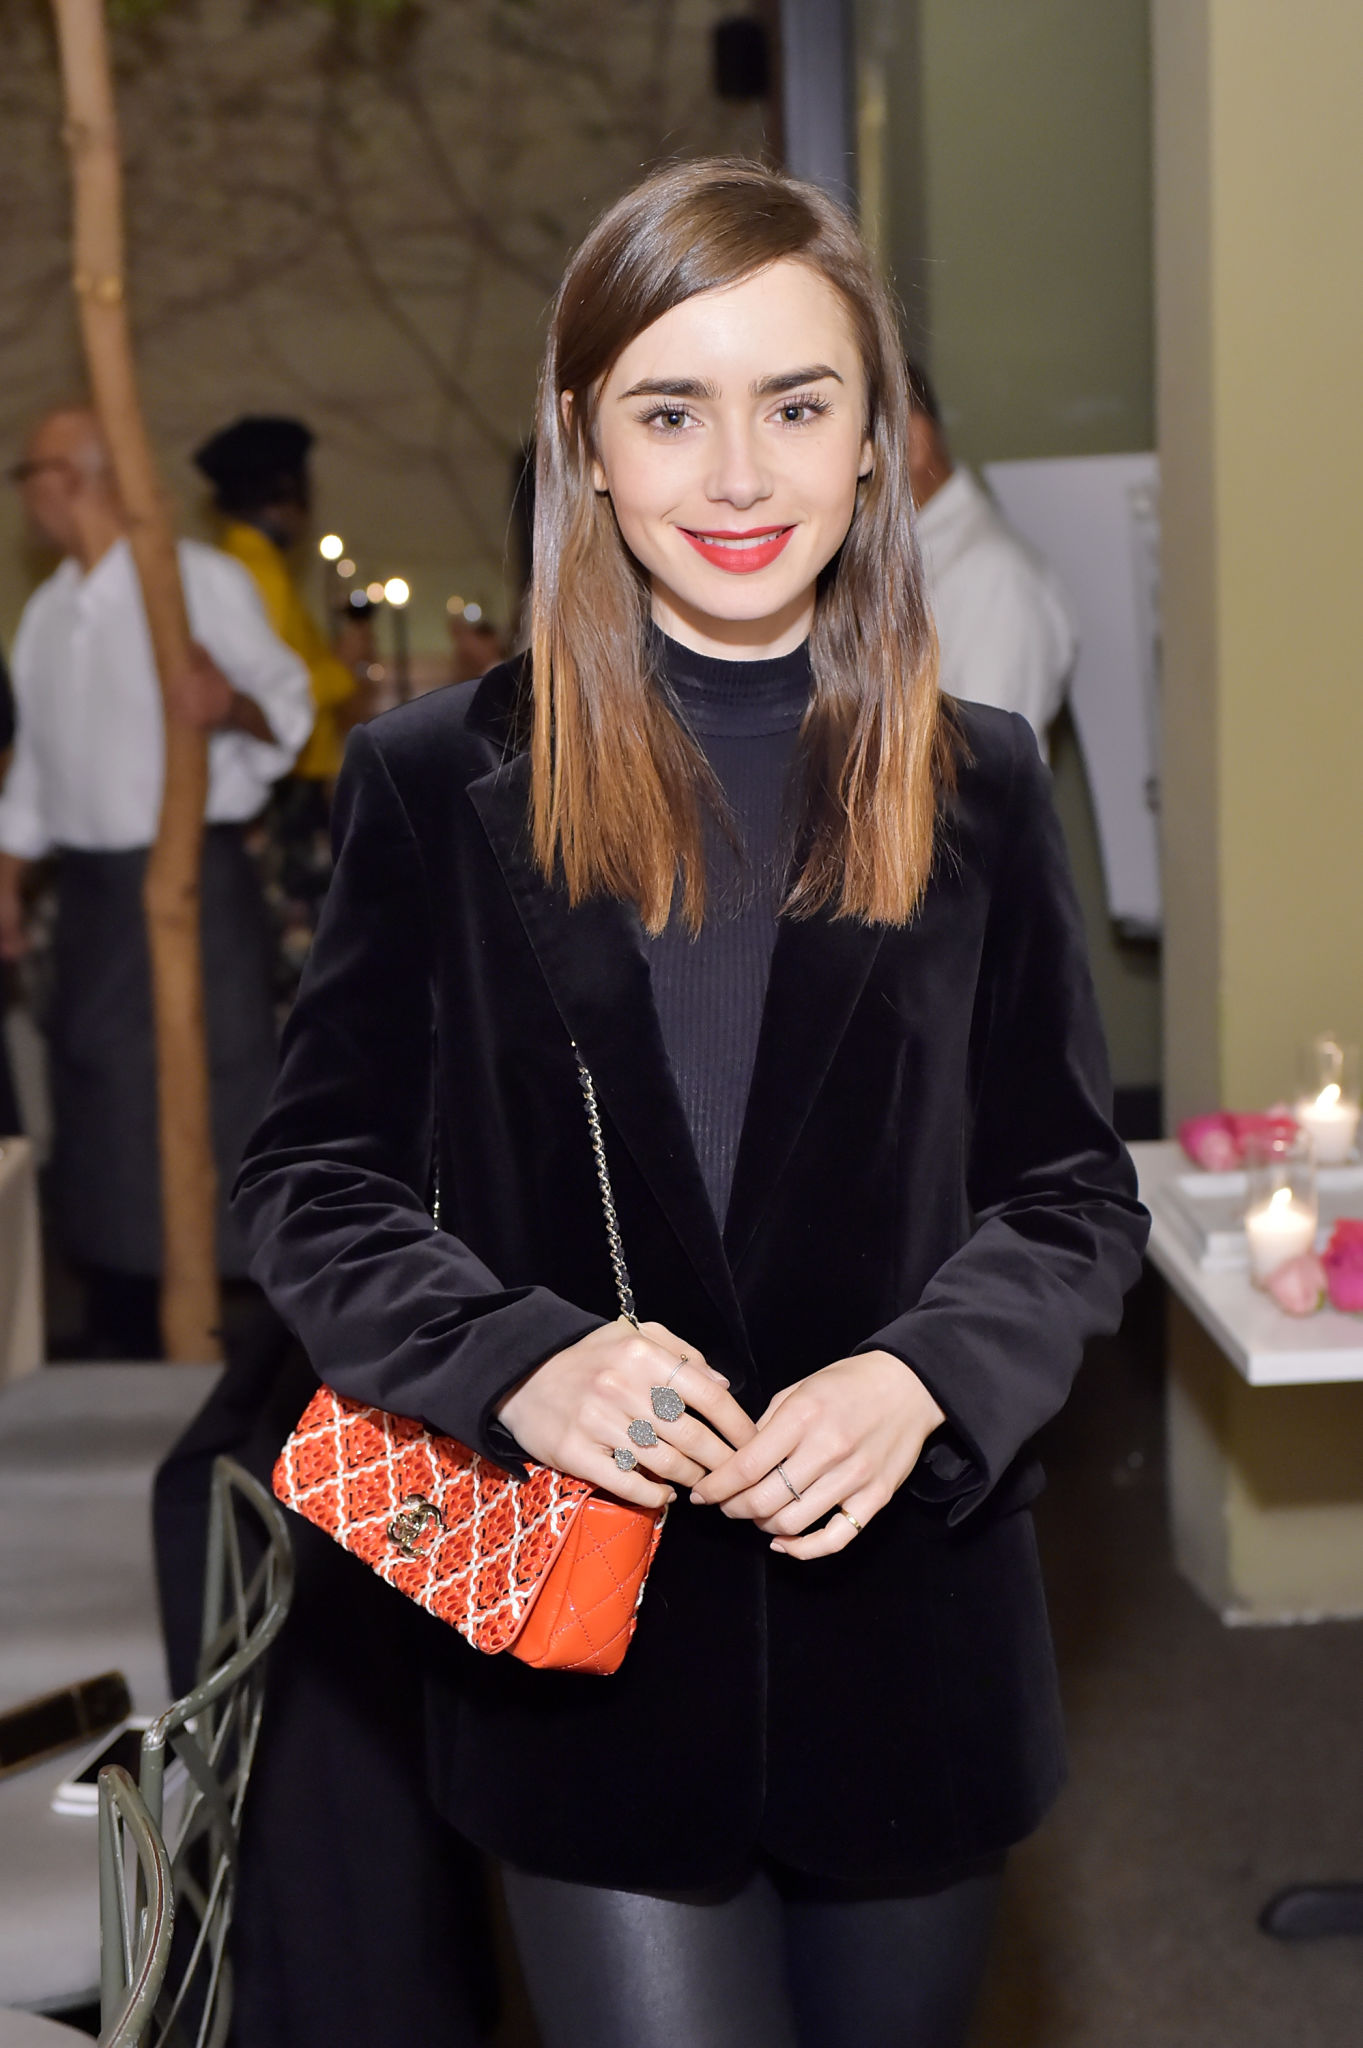 Lily Collins attends Molly R. Stern X Sarah Chloe Jewelry Collaboration Launch Dinner